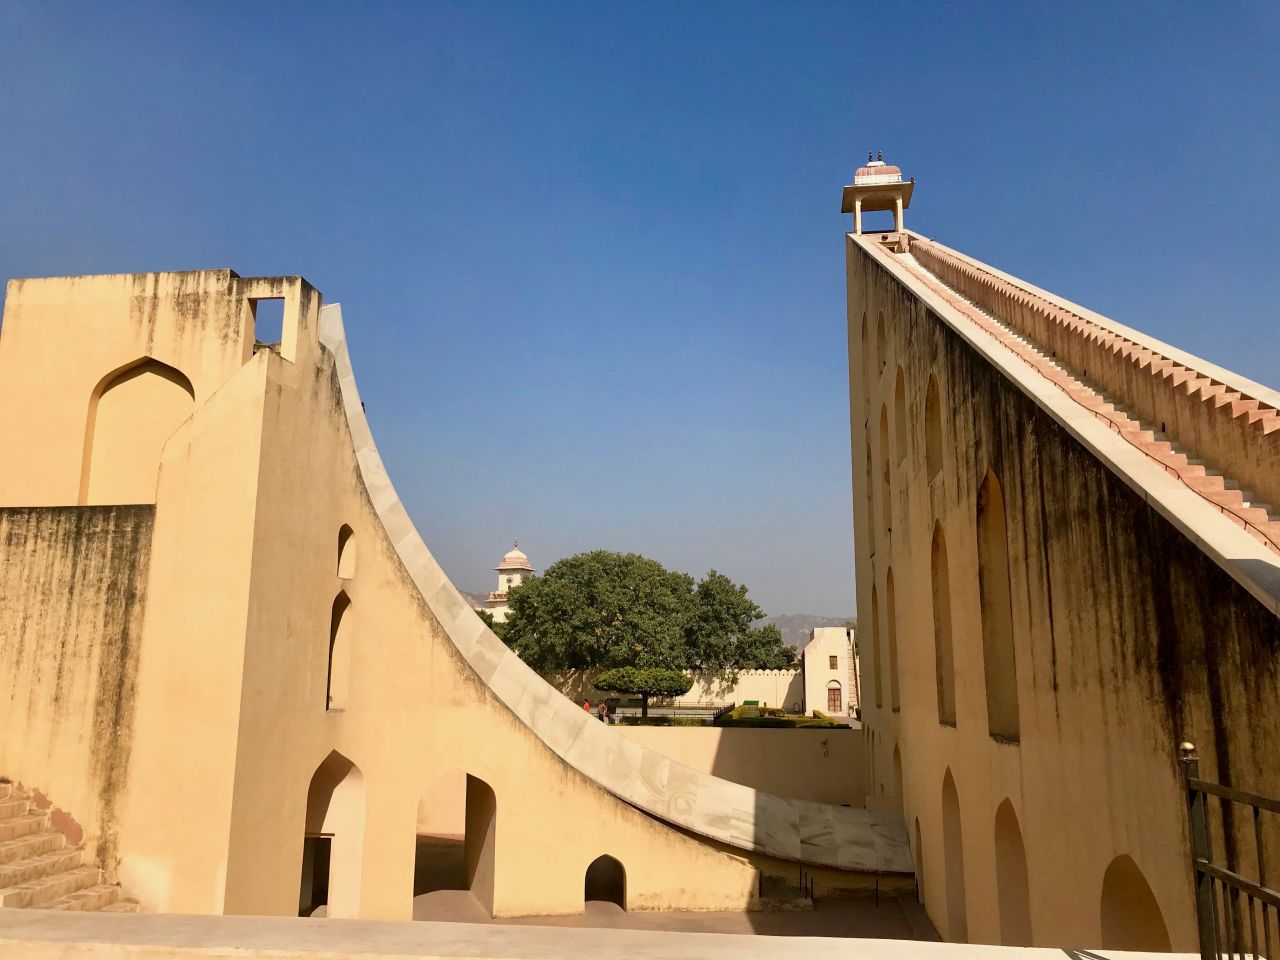 <strong>The Supreme Instrument:</strong> Impossible to miss is the towering Samrat Yantra. Also known as "The Supreme Instrument", the beautiful white marble structure features a 90-foot stairwell that seems to climb toward the heavens. It's one of the world's largest sundials.